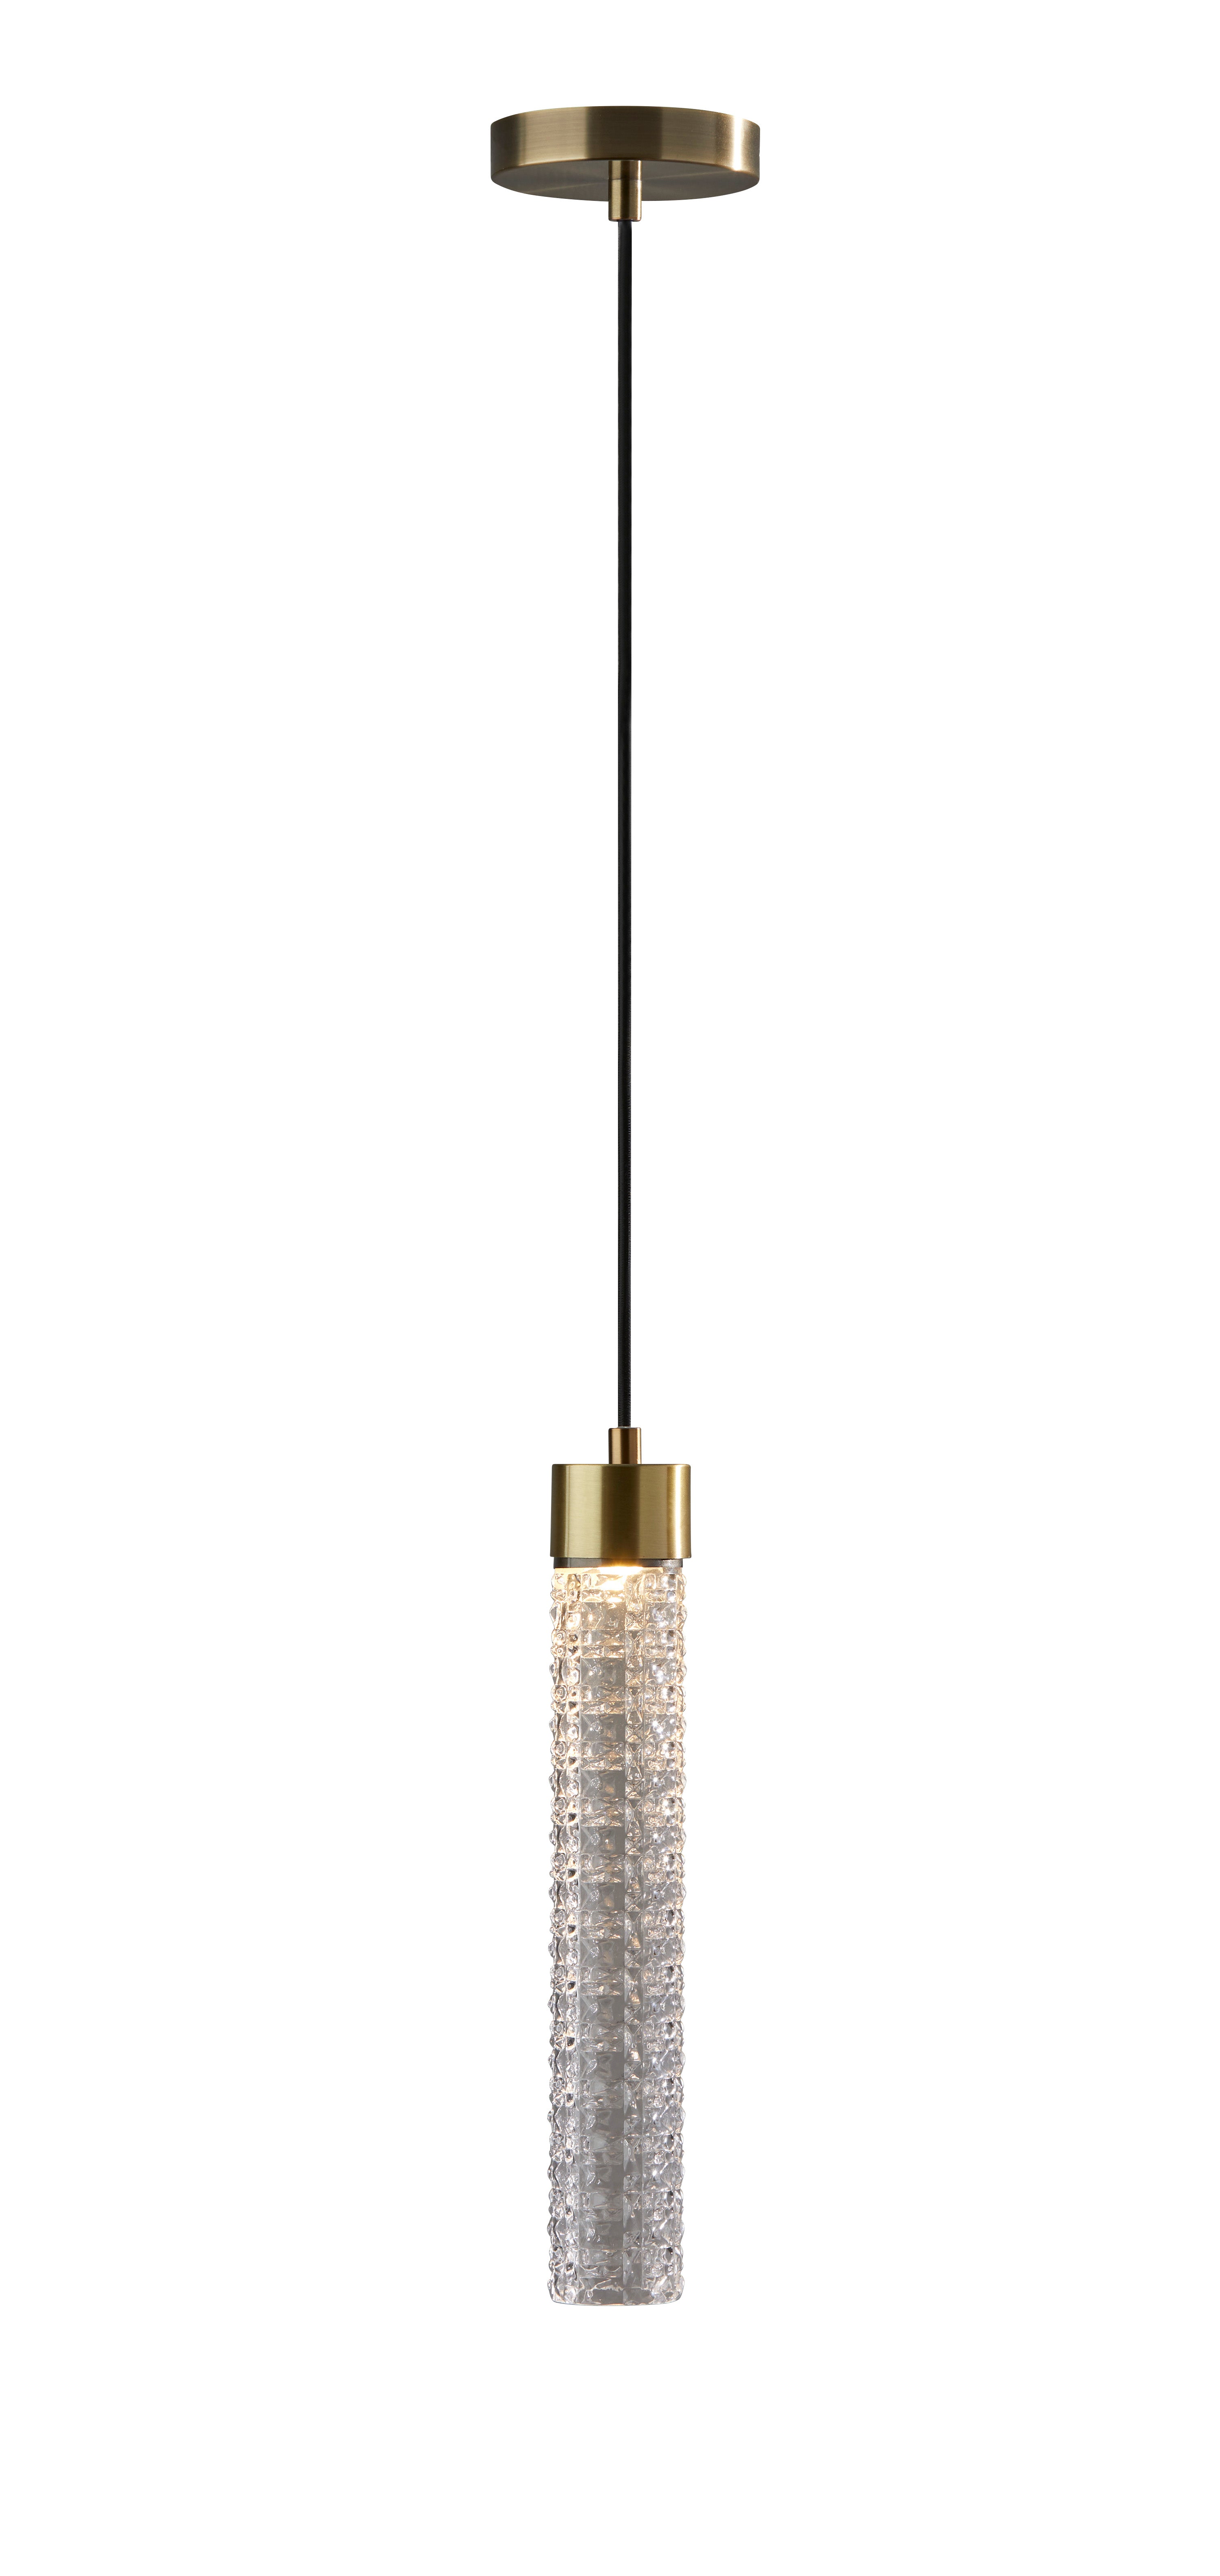 HARRIET Pendant Gold INTEGRATED LED - 3695-21 | ADESSO